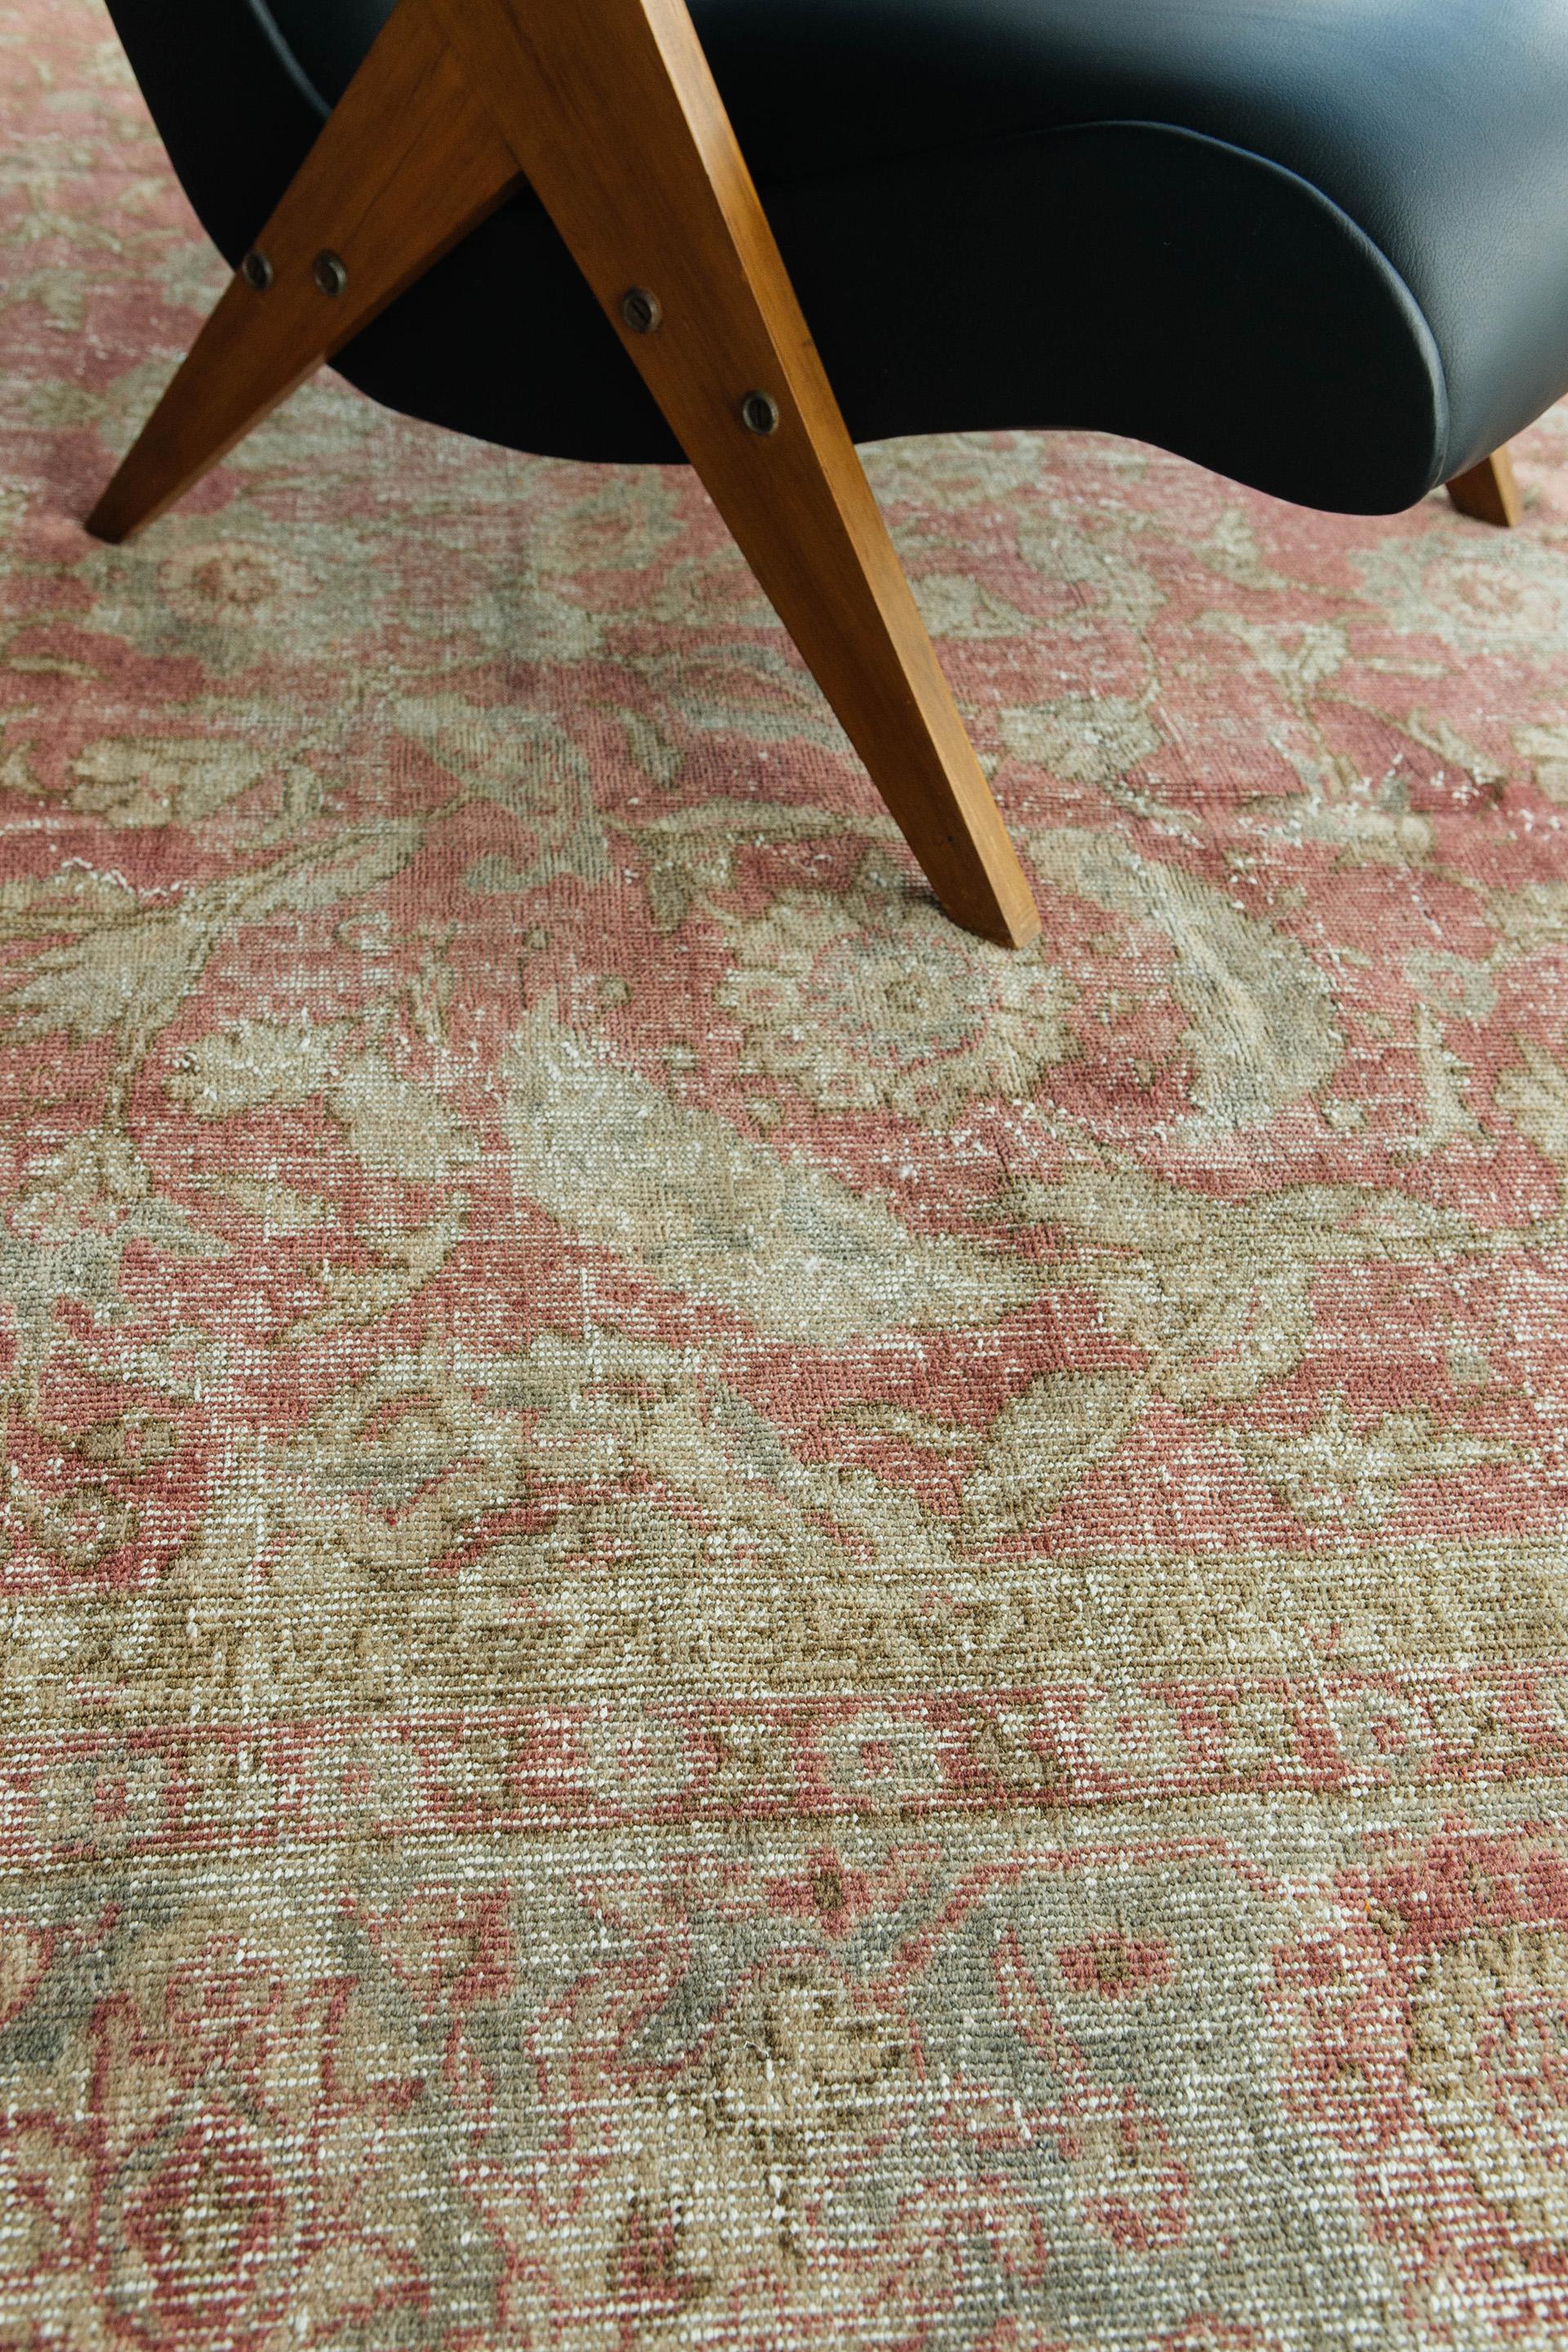 Soft cranberry red with ivory, gray and walnut brown tones. All-over field pattern of curvilinear leaf, blossom and palmette grace this time-touched rug. The elegance and sophistication of the design remains clear in spite of foundation reveal. This